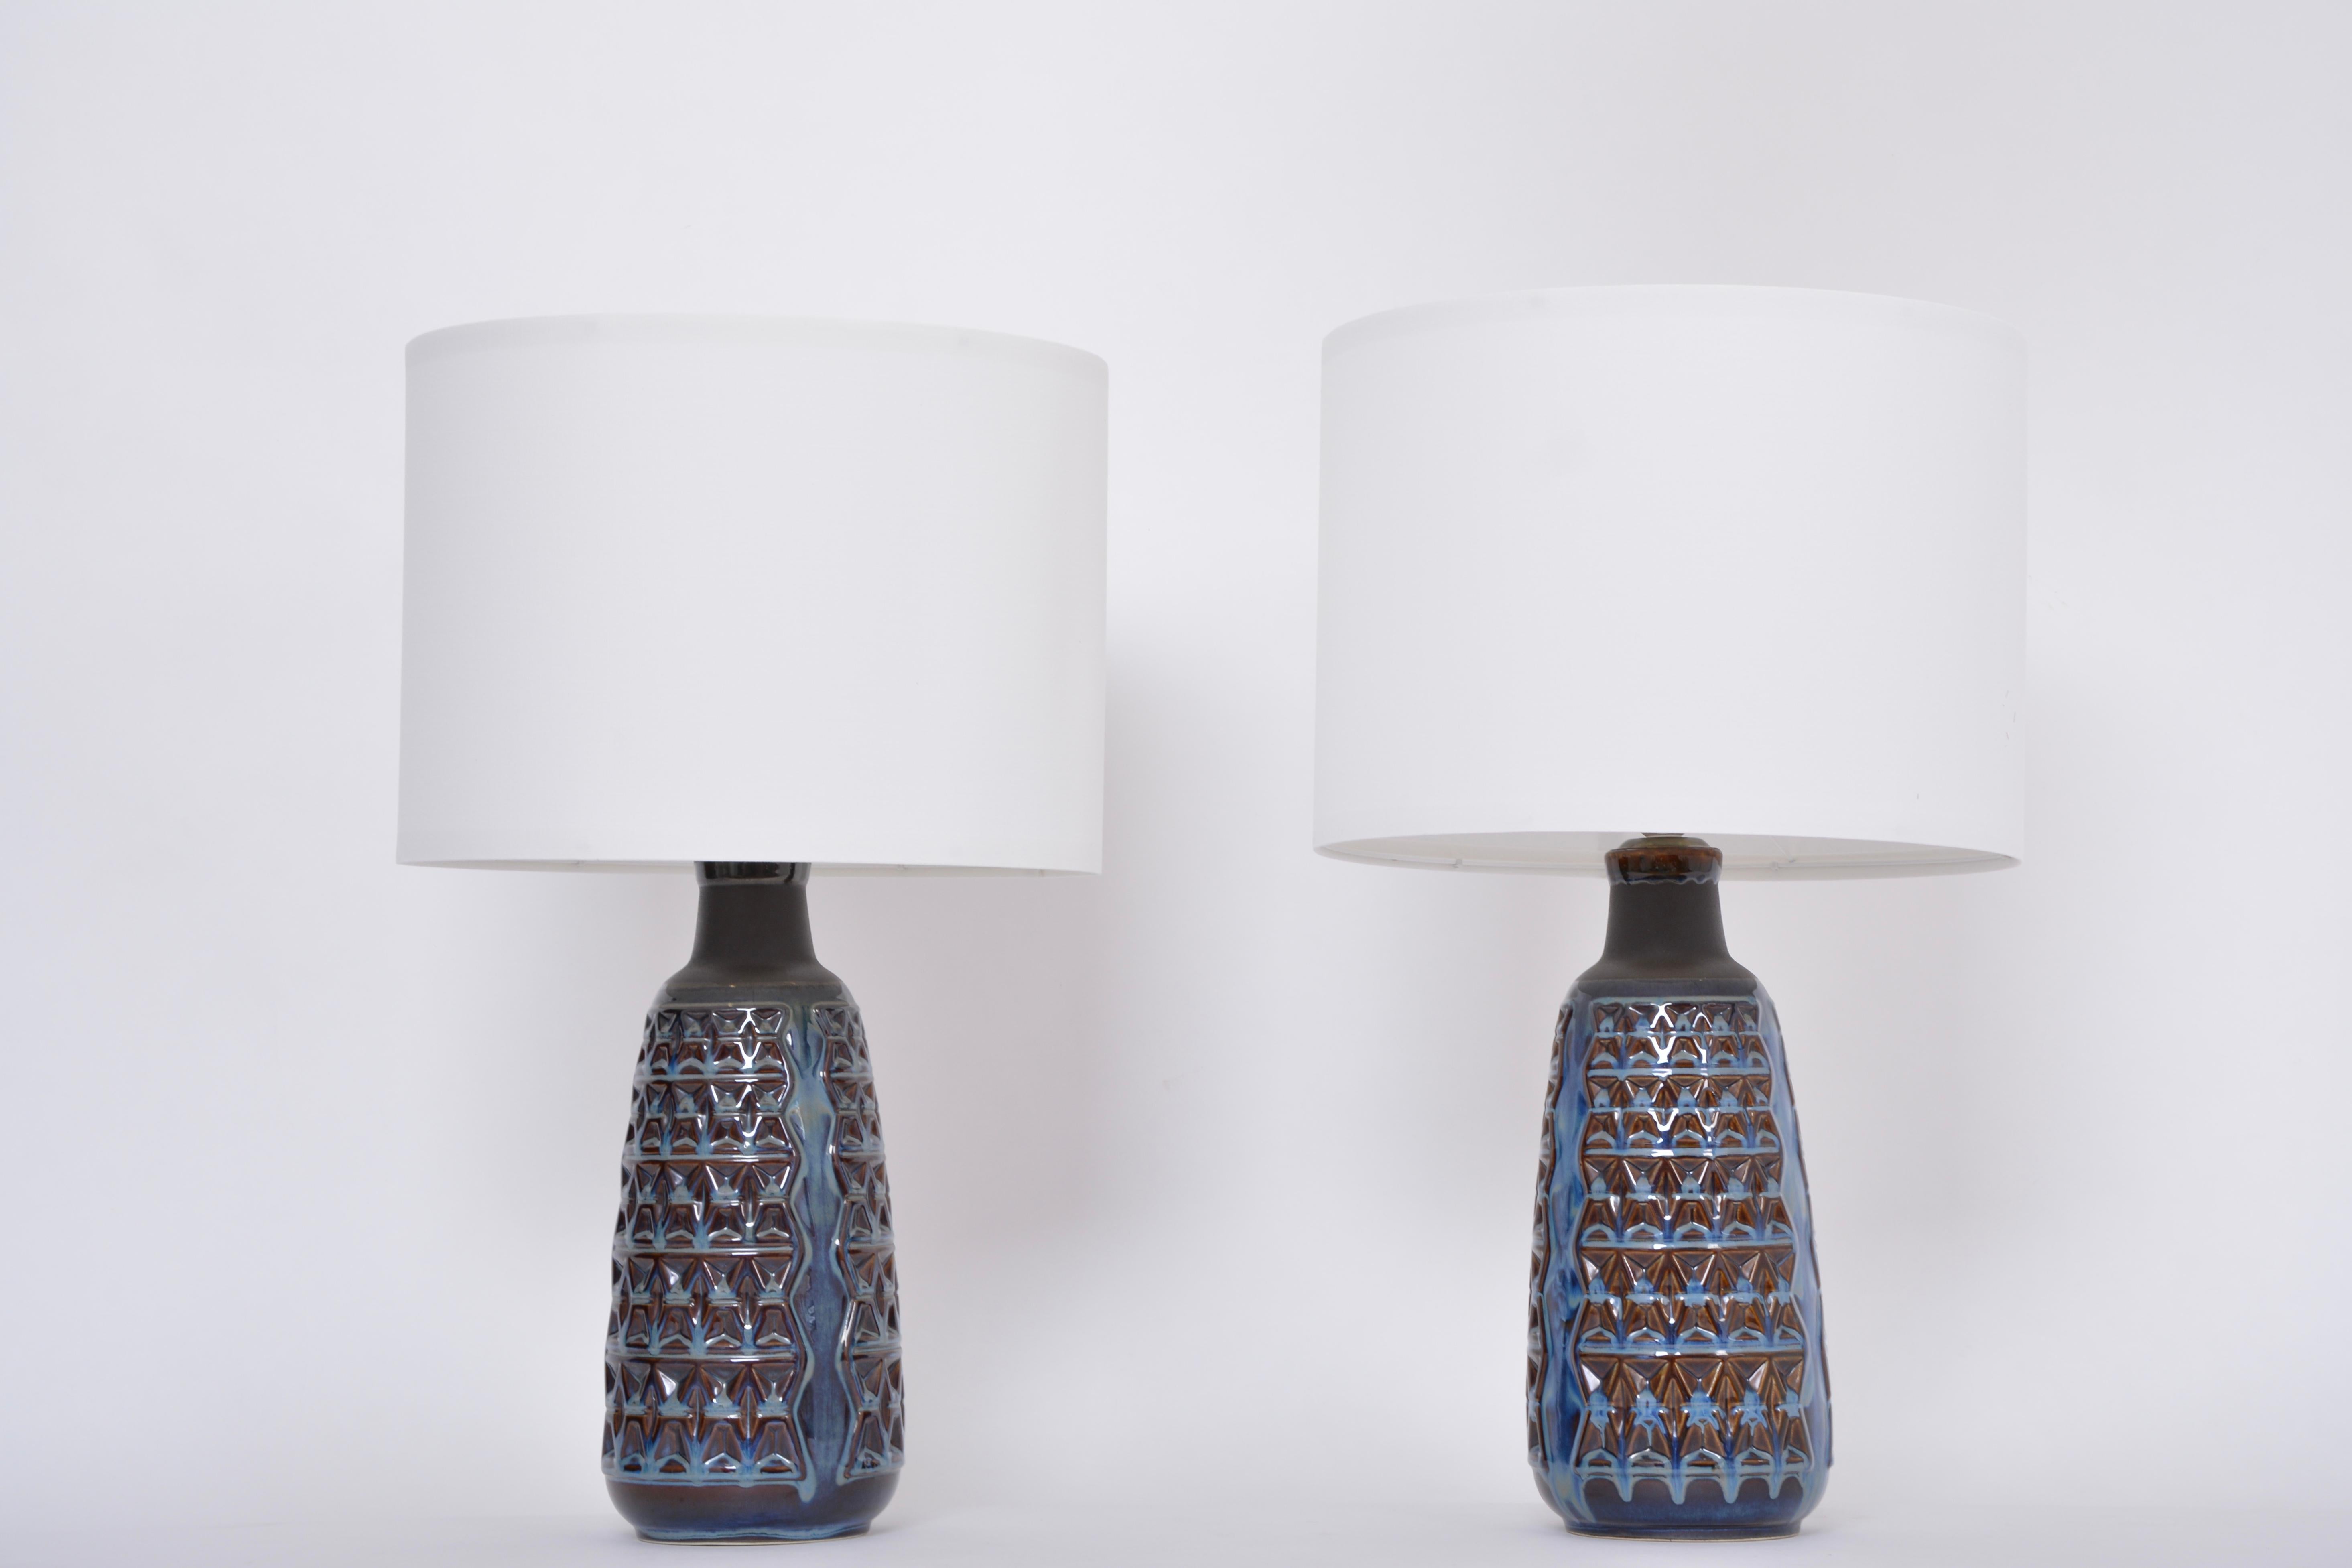 Pair of Tall Blue Mid-Century Modern Table Lamps model 3340 by Einar Johansen for Soholm
These table lamps were originally vases that have been converted into spectacular and impressive table lamps. Einar Johansen designed these vases for Danish